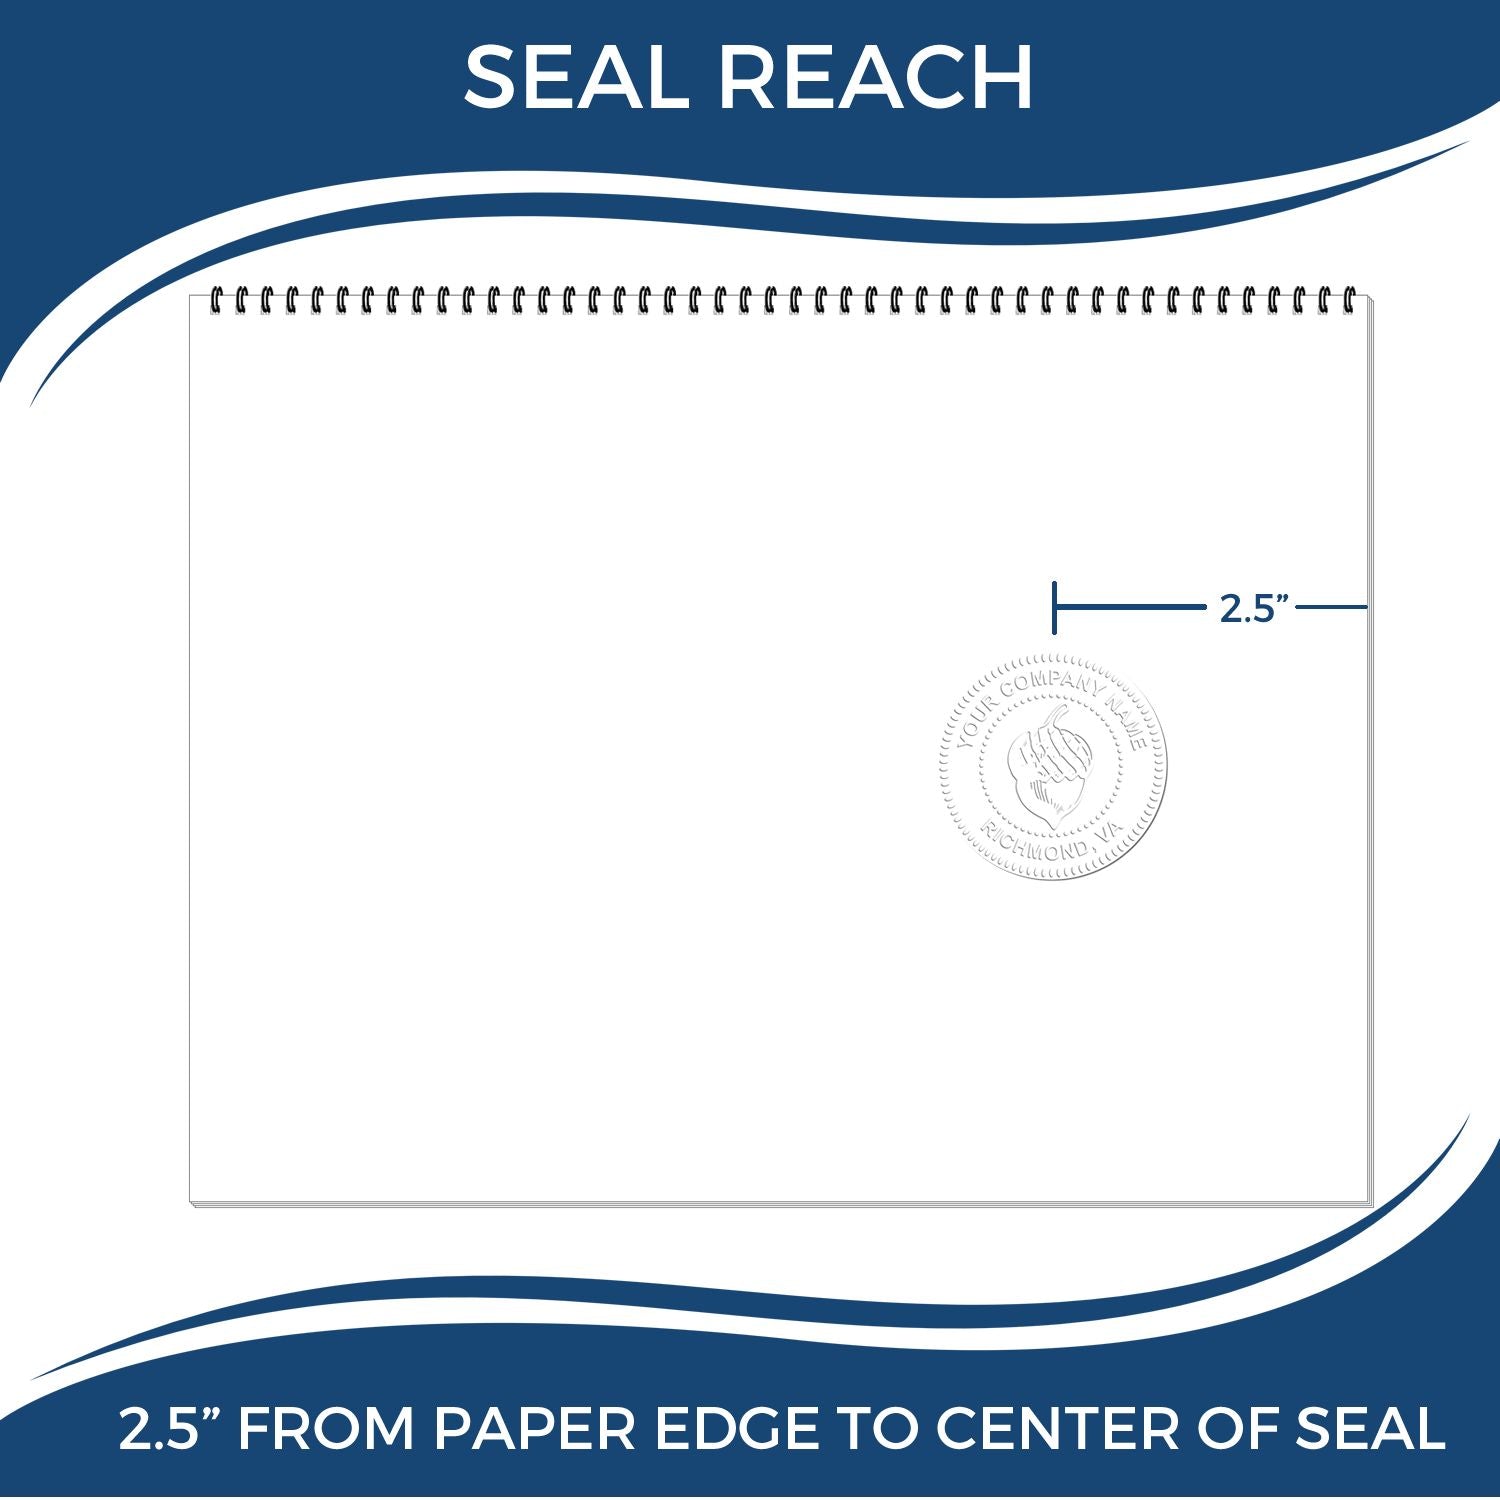 An infographic showing the seal reach which is represented by a ruler and a miniature seal image of the Heavy Duty Cast Iron Tennessee Geologist Seal Embosser